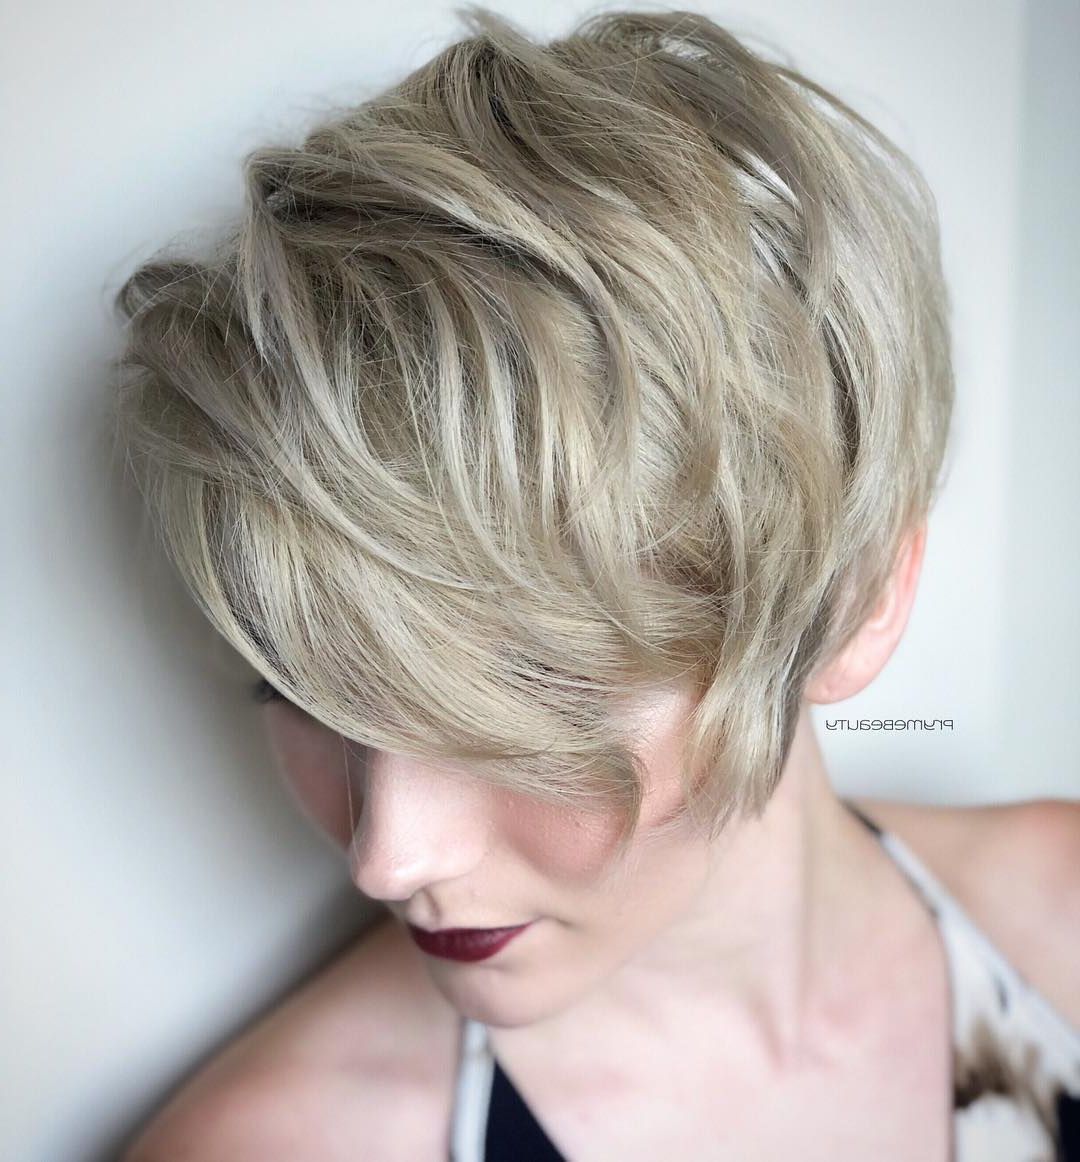 Latest Short Asymmetric Bob Hairstyles With Textured Curls With Regard To Top 10 Trendy, Low Maintenance Short Layered Hairstyles  (View 9 of 20)